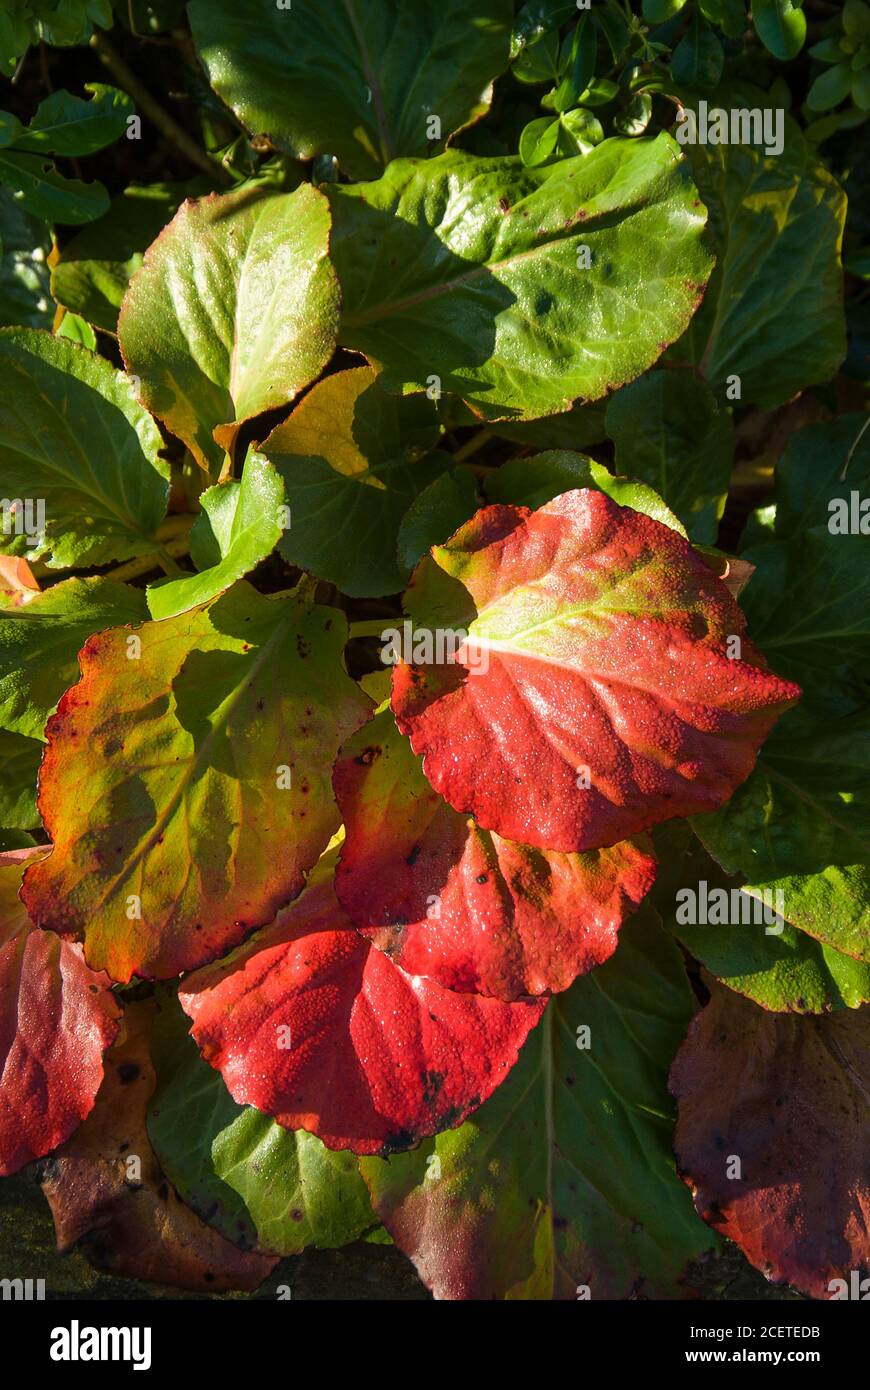 Leaves are changing colour from green to bright red on this Bergenia perennial plant in October in an English garden Stock Photo